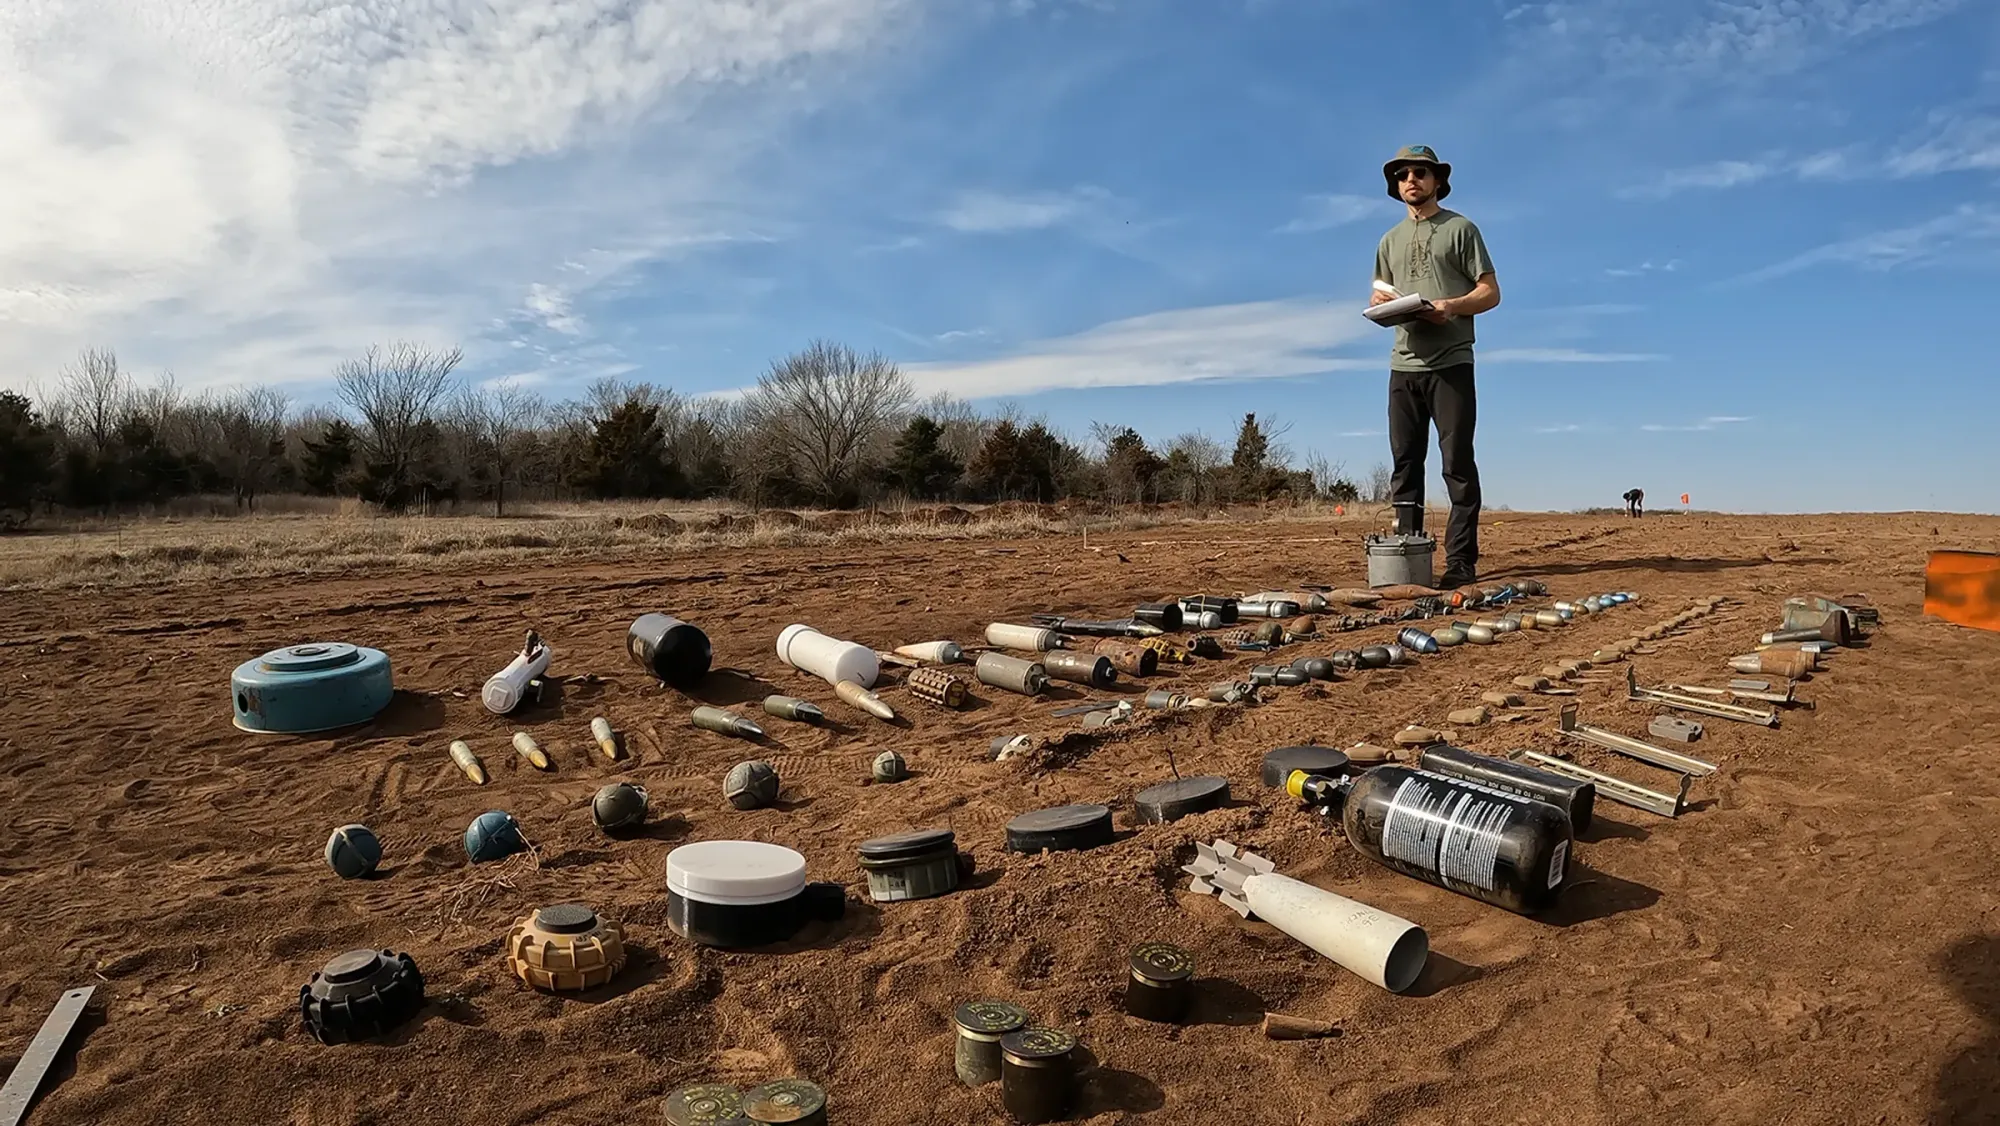 A startup is harnessing the power of drones and AI to revolutionize demining